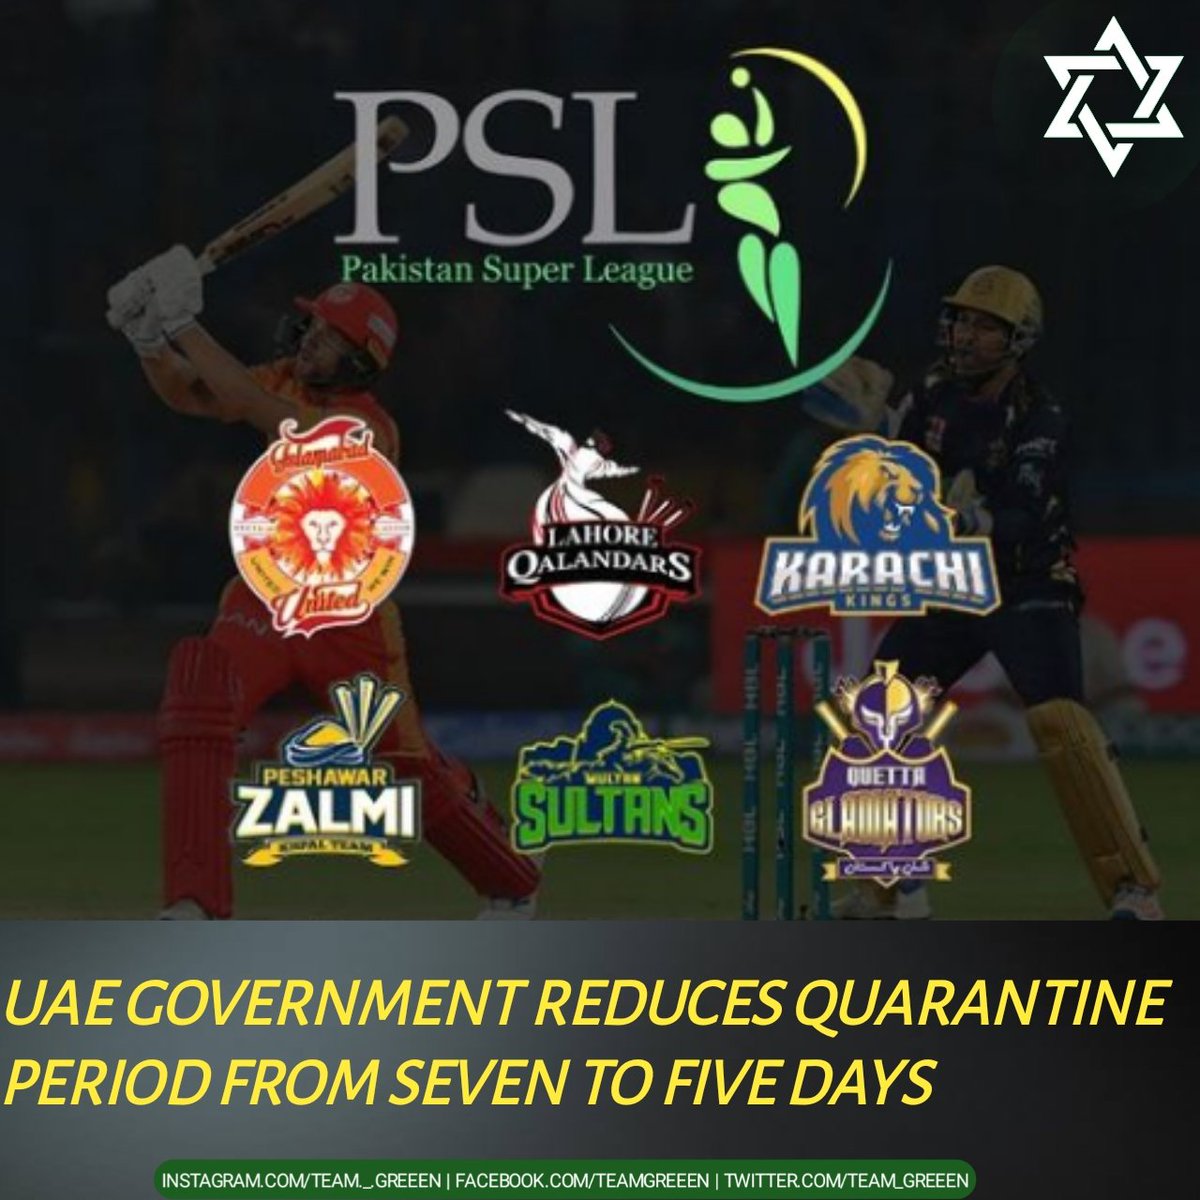 UAE government reduces quarantine period from seven to five days.

According to sources, the players, officials and broadcast crew will undergo five-day isolation instead of seven days.
#PSL6 #PCB #UAEGovernment #Team_Greeen